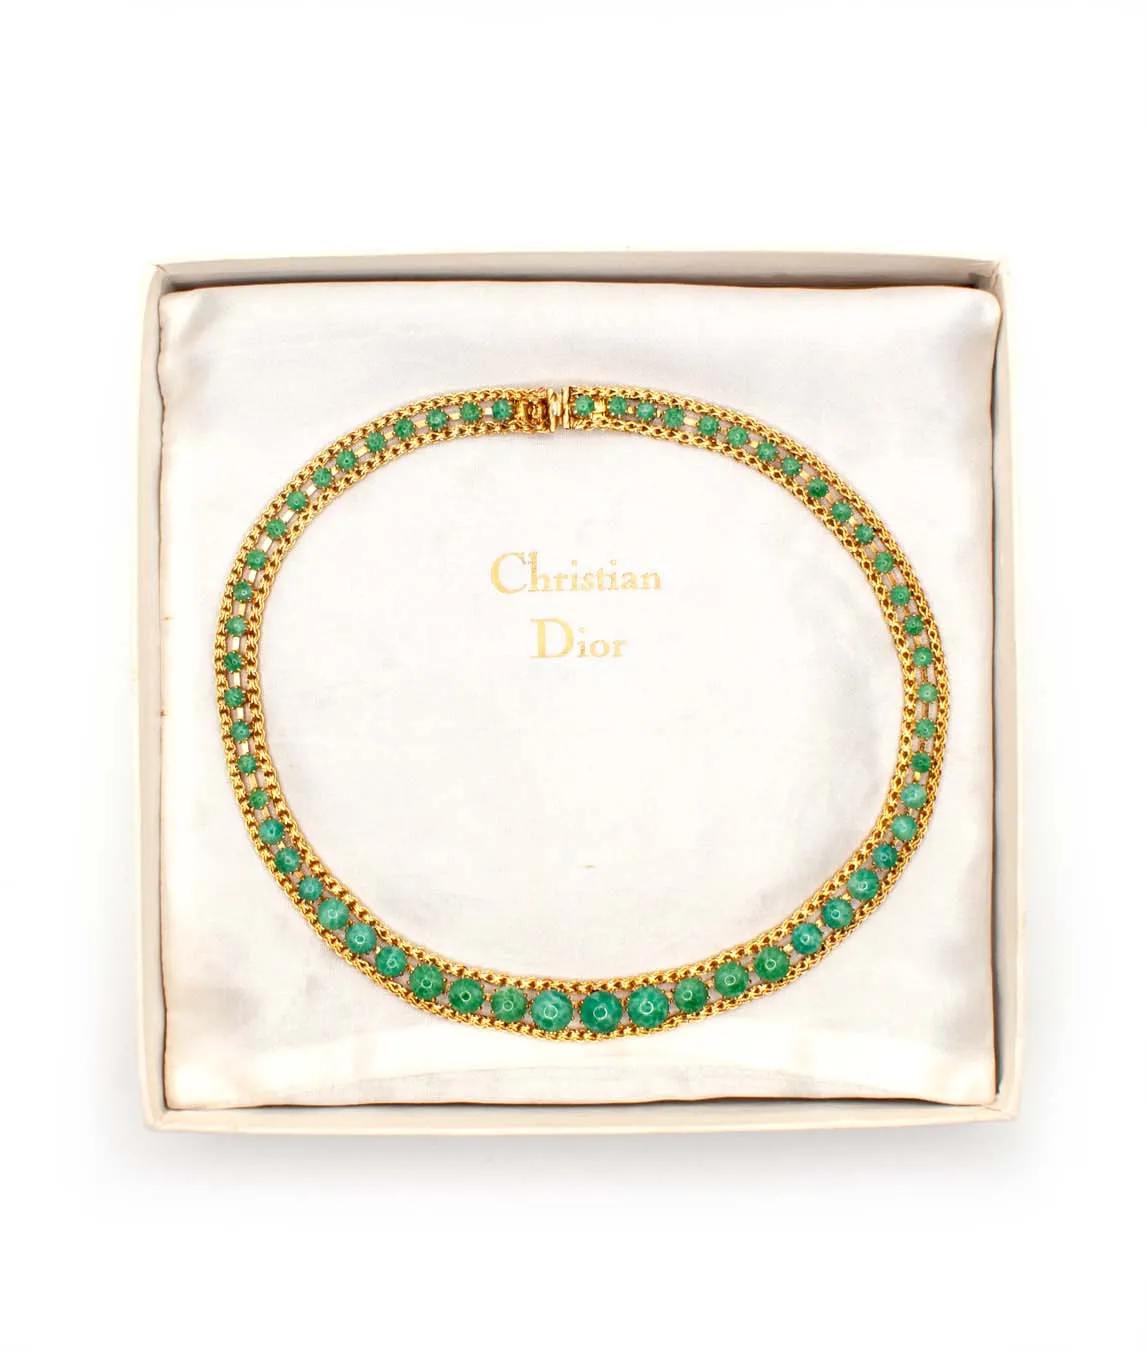 Christian Dior vintage green and gold choker necklace on satin lined box 